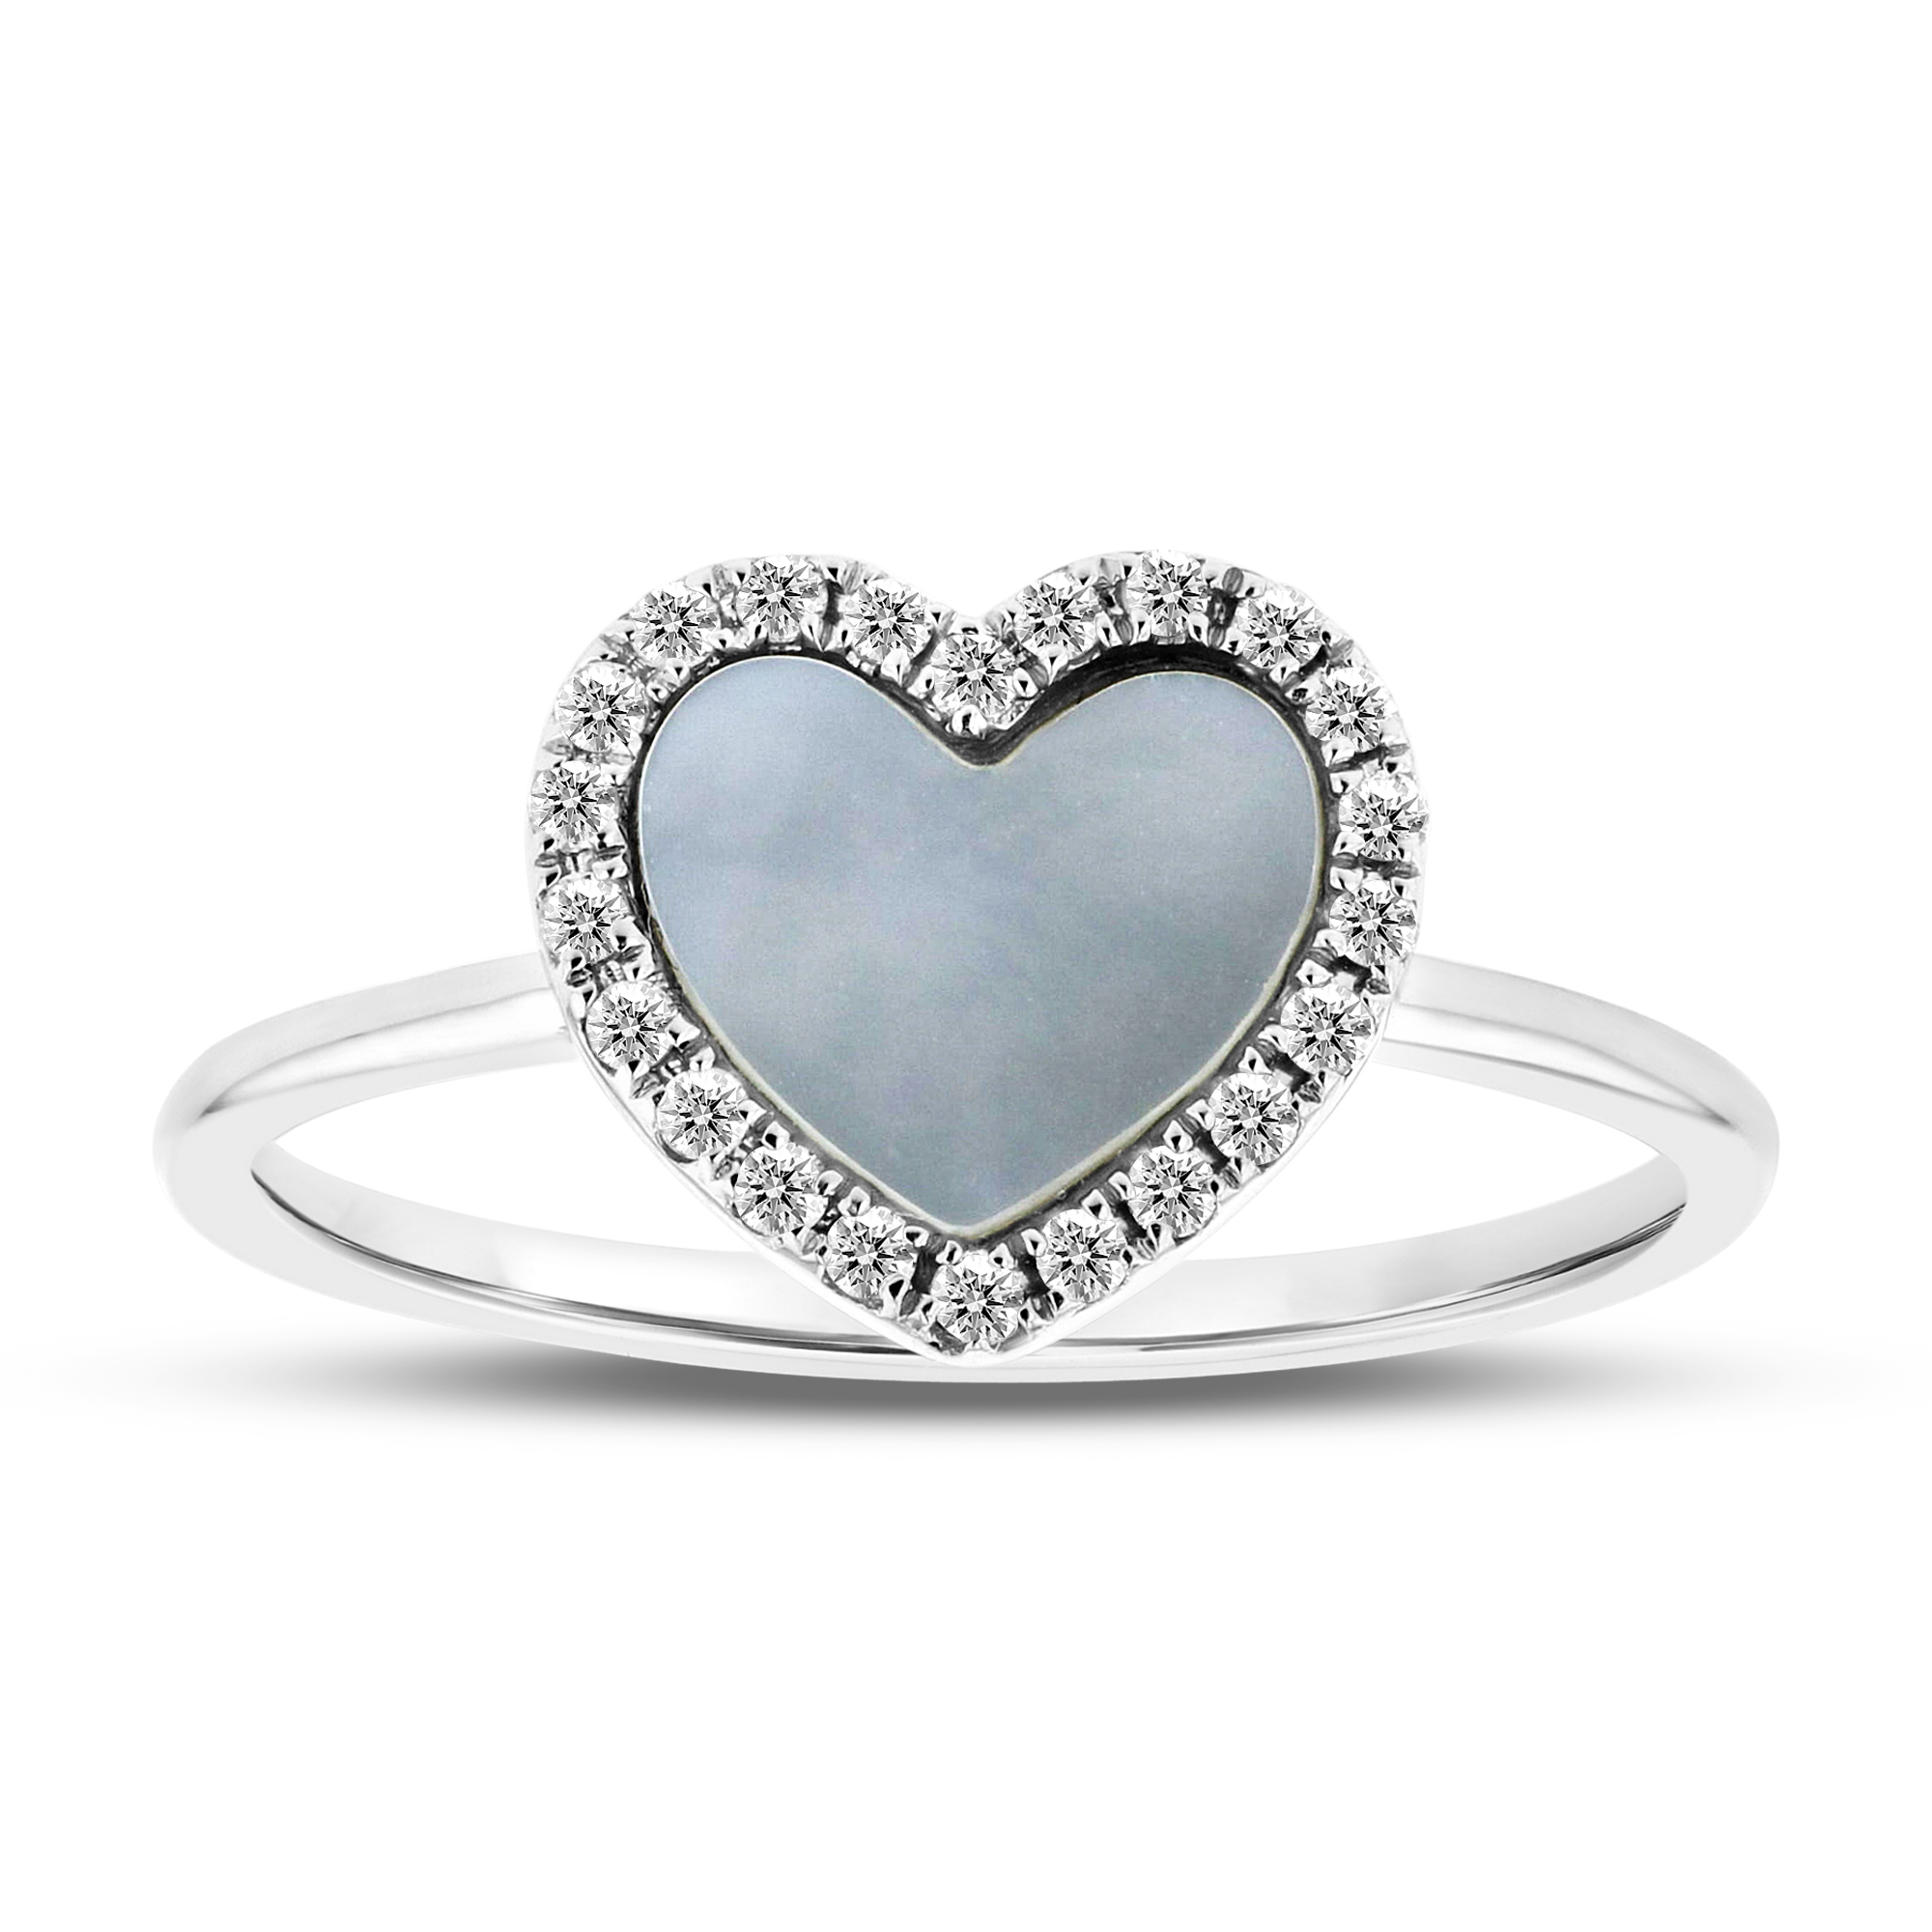 View 00.58ctw Diamond and Mother of Pearl Heart Shaped Ring in 14k White Gold